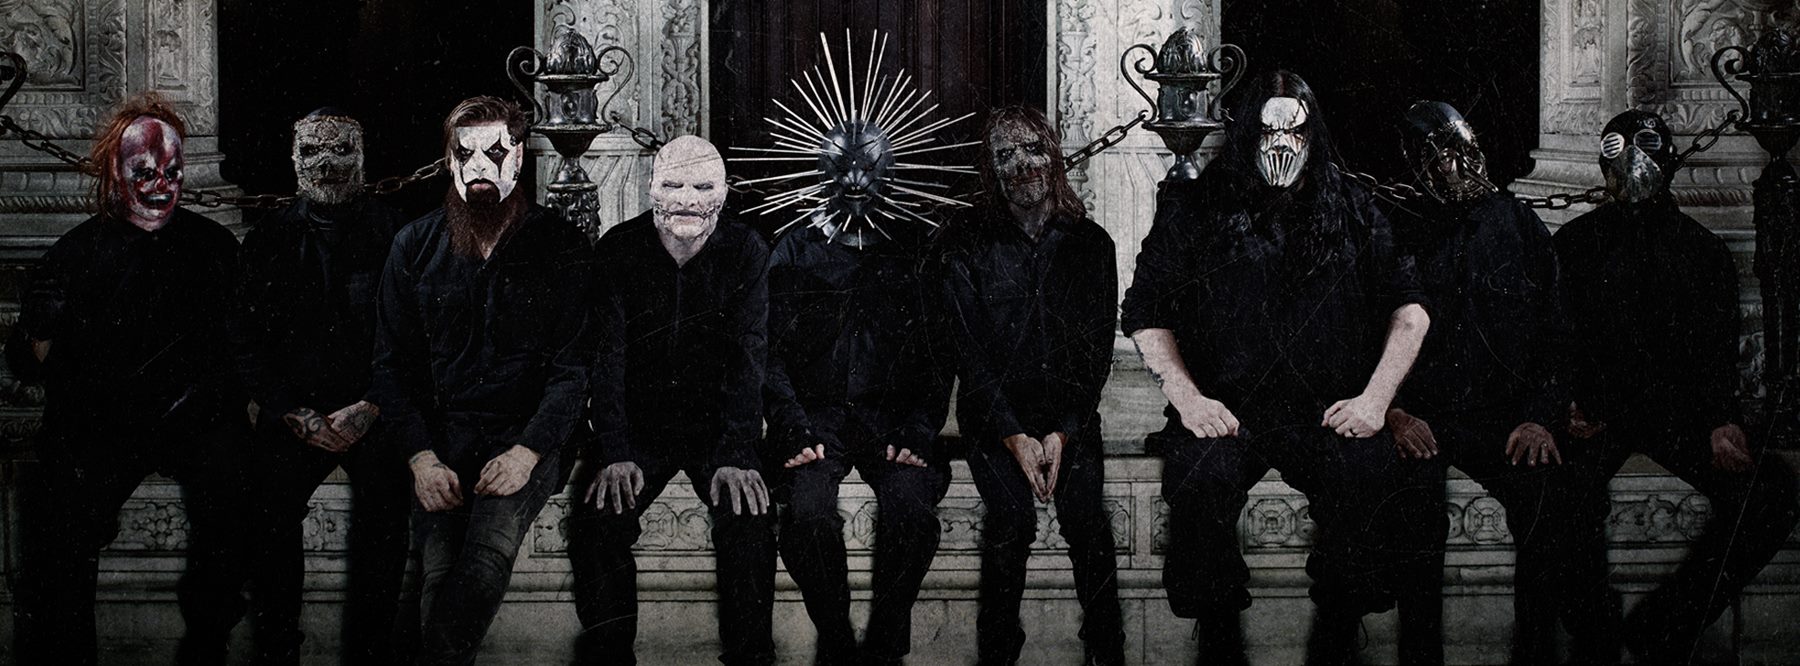 Slipknot put out casting call for new music video